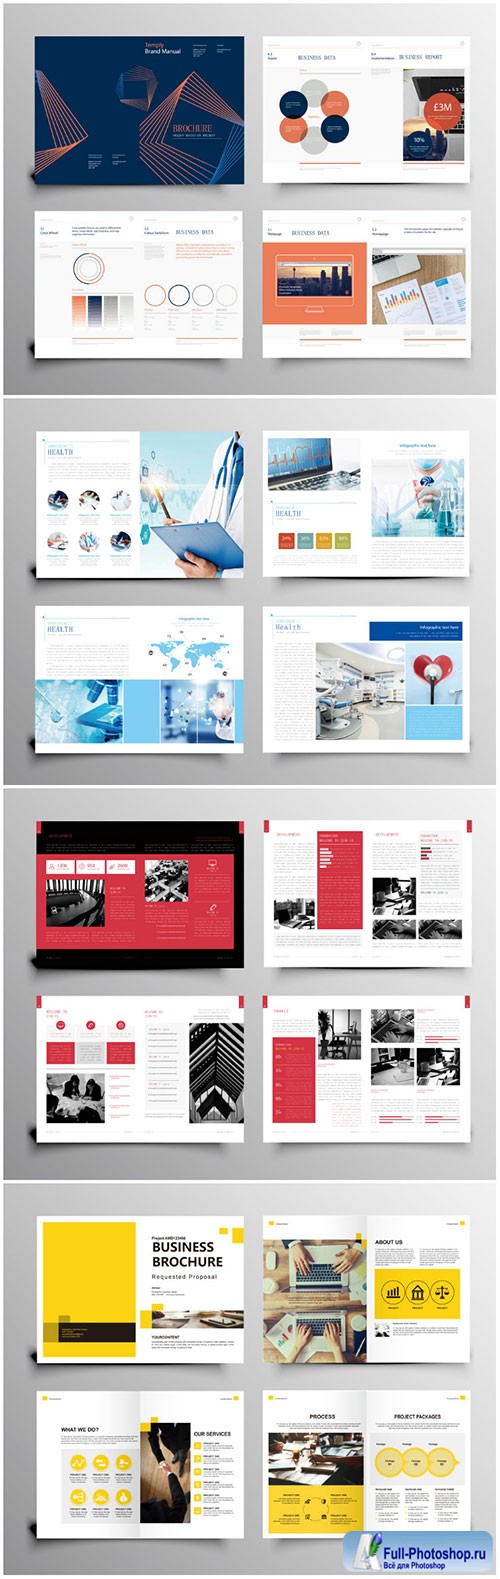 Brochure template vector layout design, corporate business annual report, magazine, flyer mockup # 233